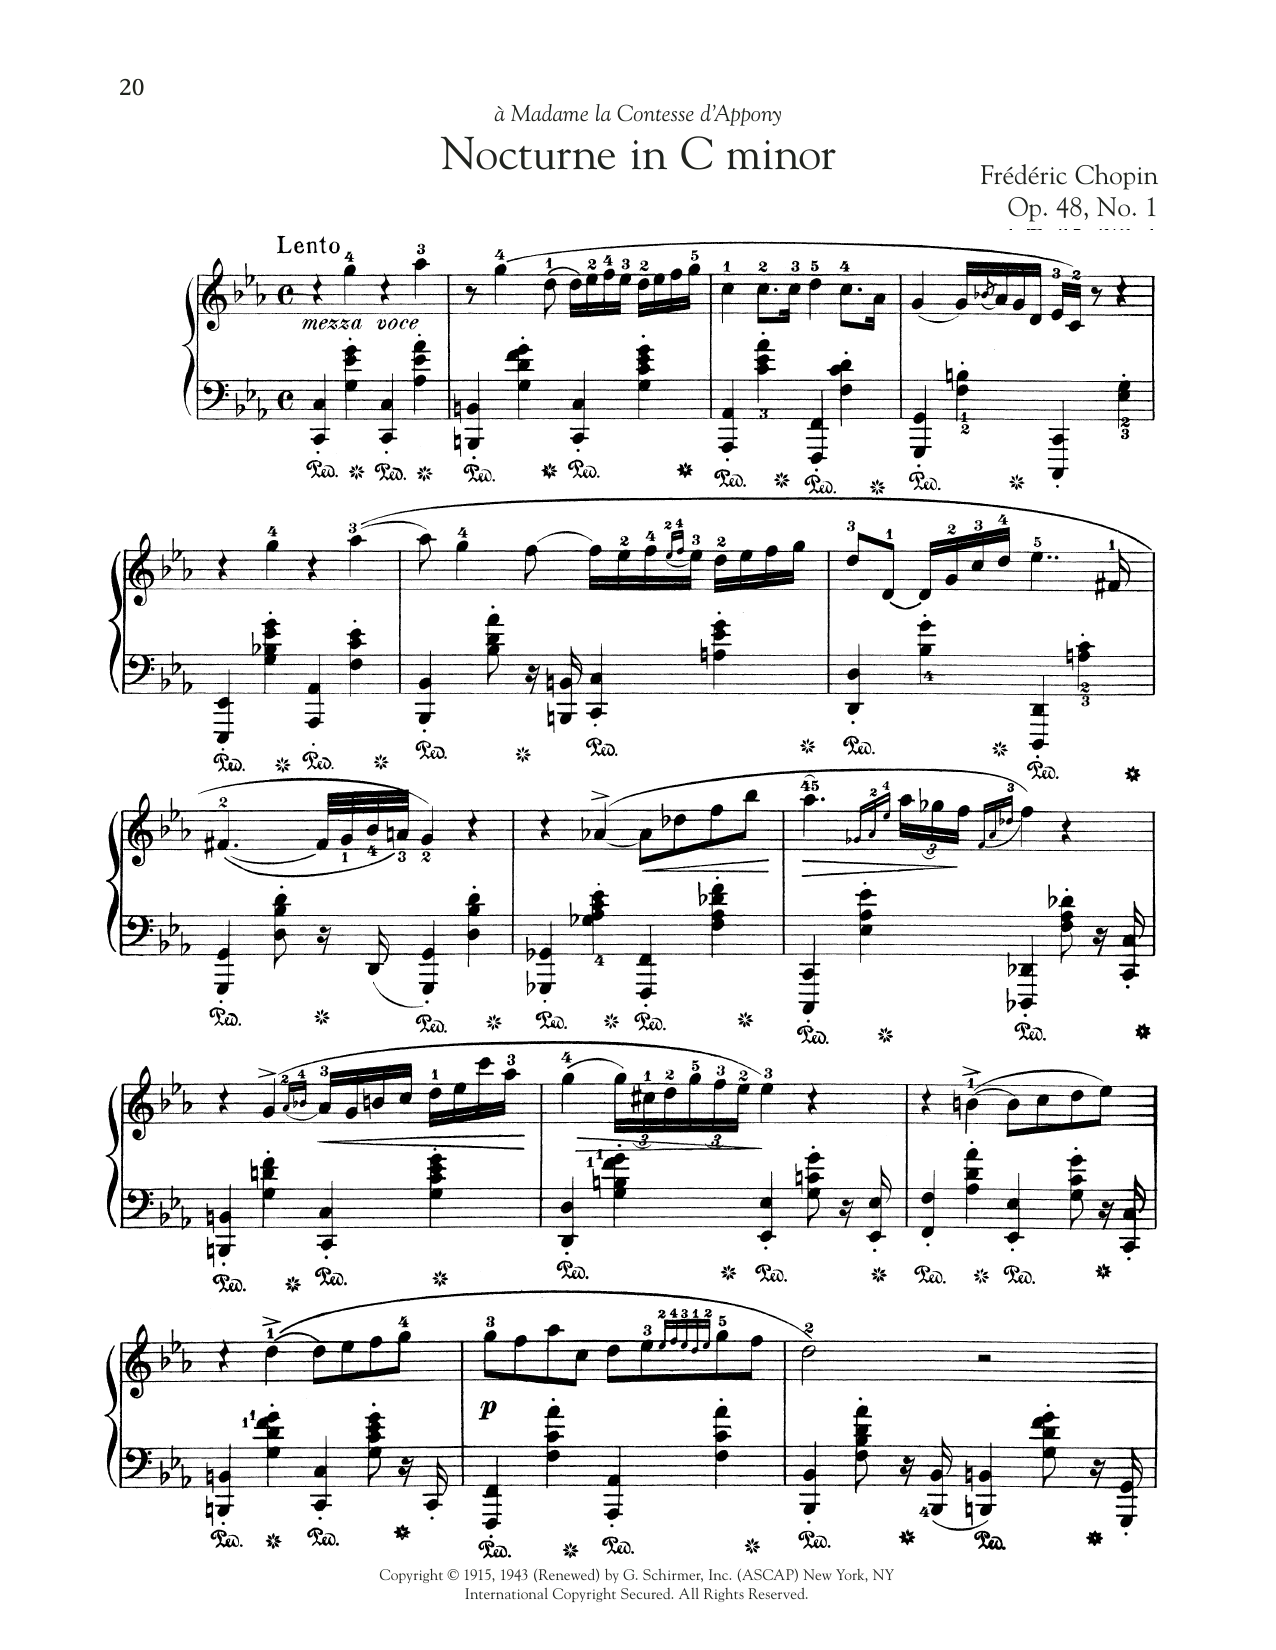 Frederic Chopin Nocturne, Op. 48, No. 1 sheet music preview music notes and score for Piano Solo including 6 page(s)